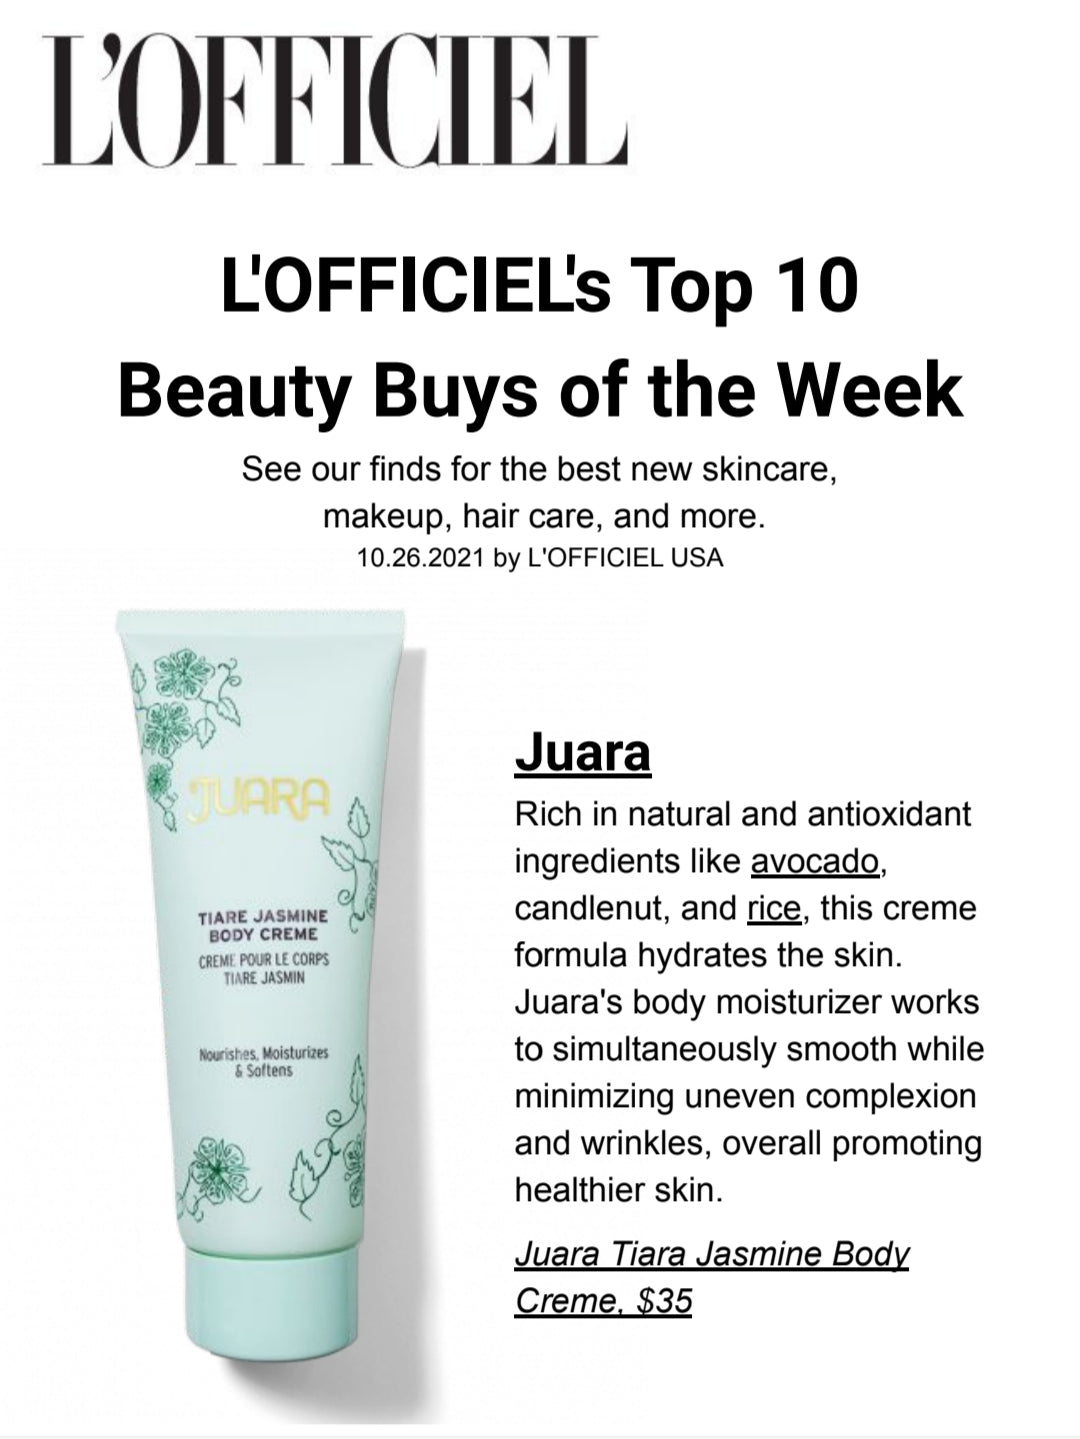 L'OFFICICIEL USA: L'OFFICIEL's TOP 10 Beauty Buys of the Week JUARA Skincare